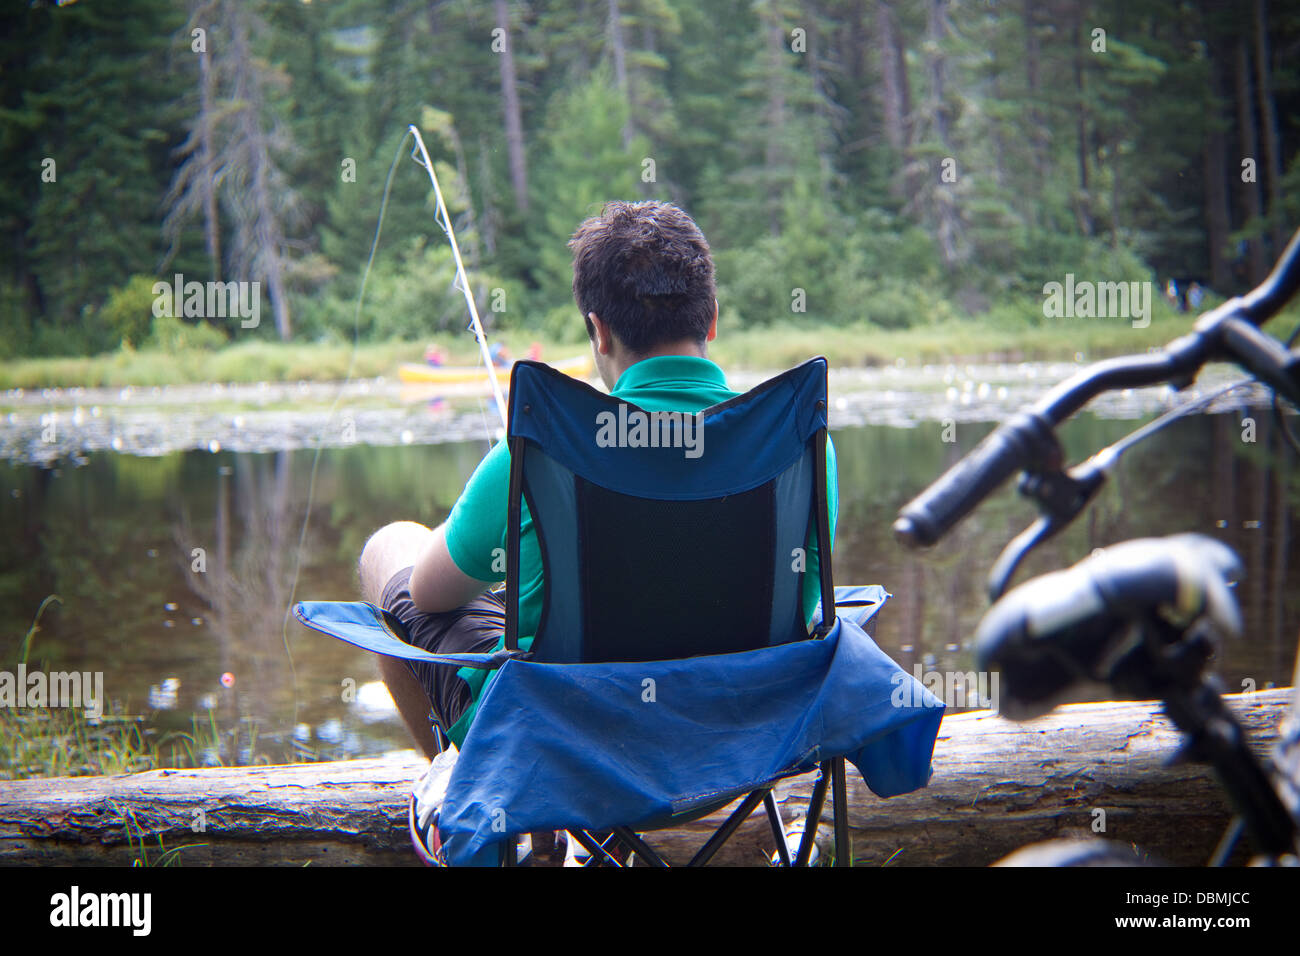 https://c8.alamy.com/comp/DBMJCC/a-teenage-boy-fishing-by-the-lakeside-in-his-camp-chair-DBMJCC.jpg